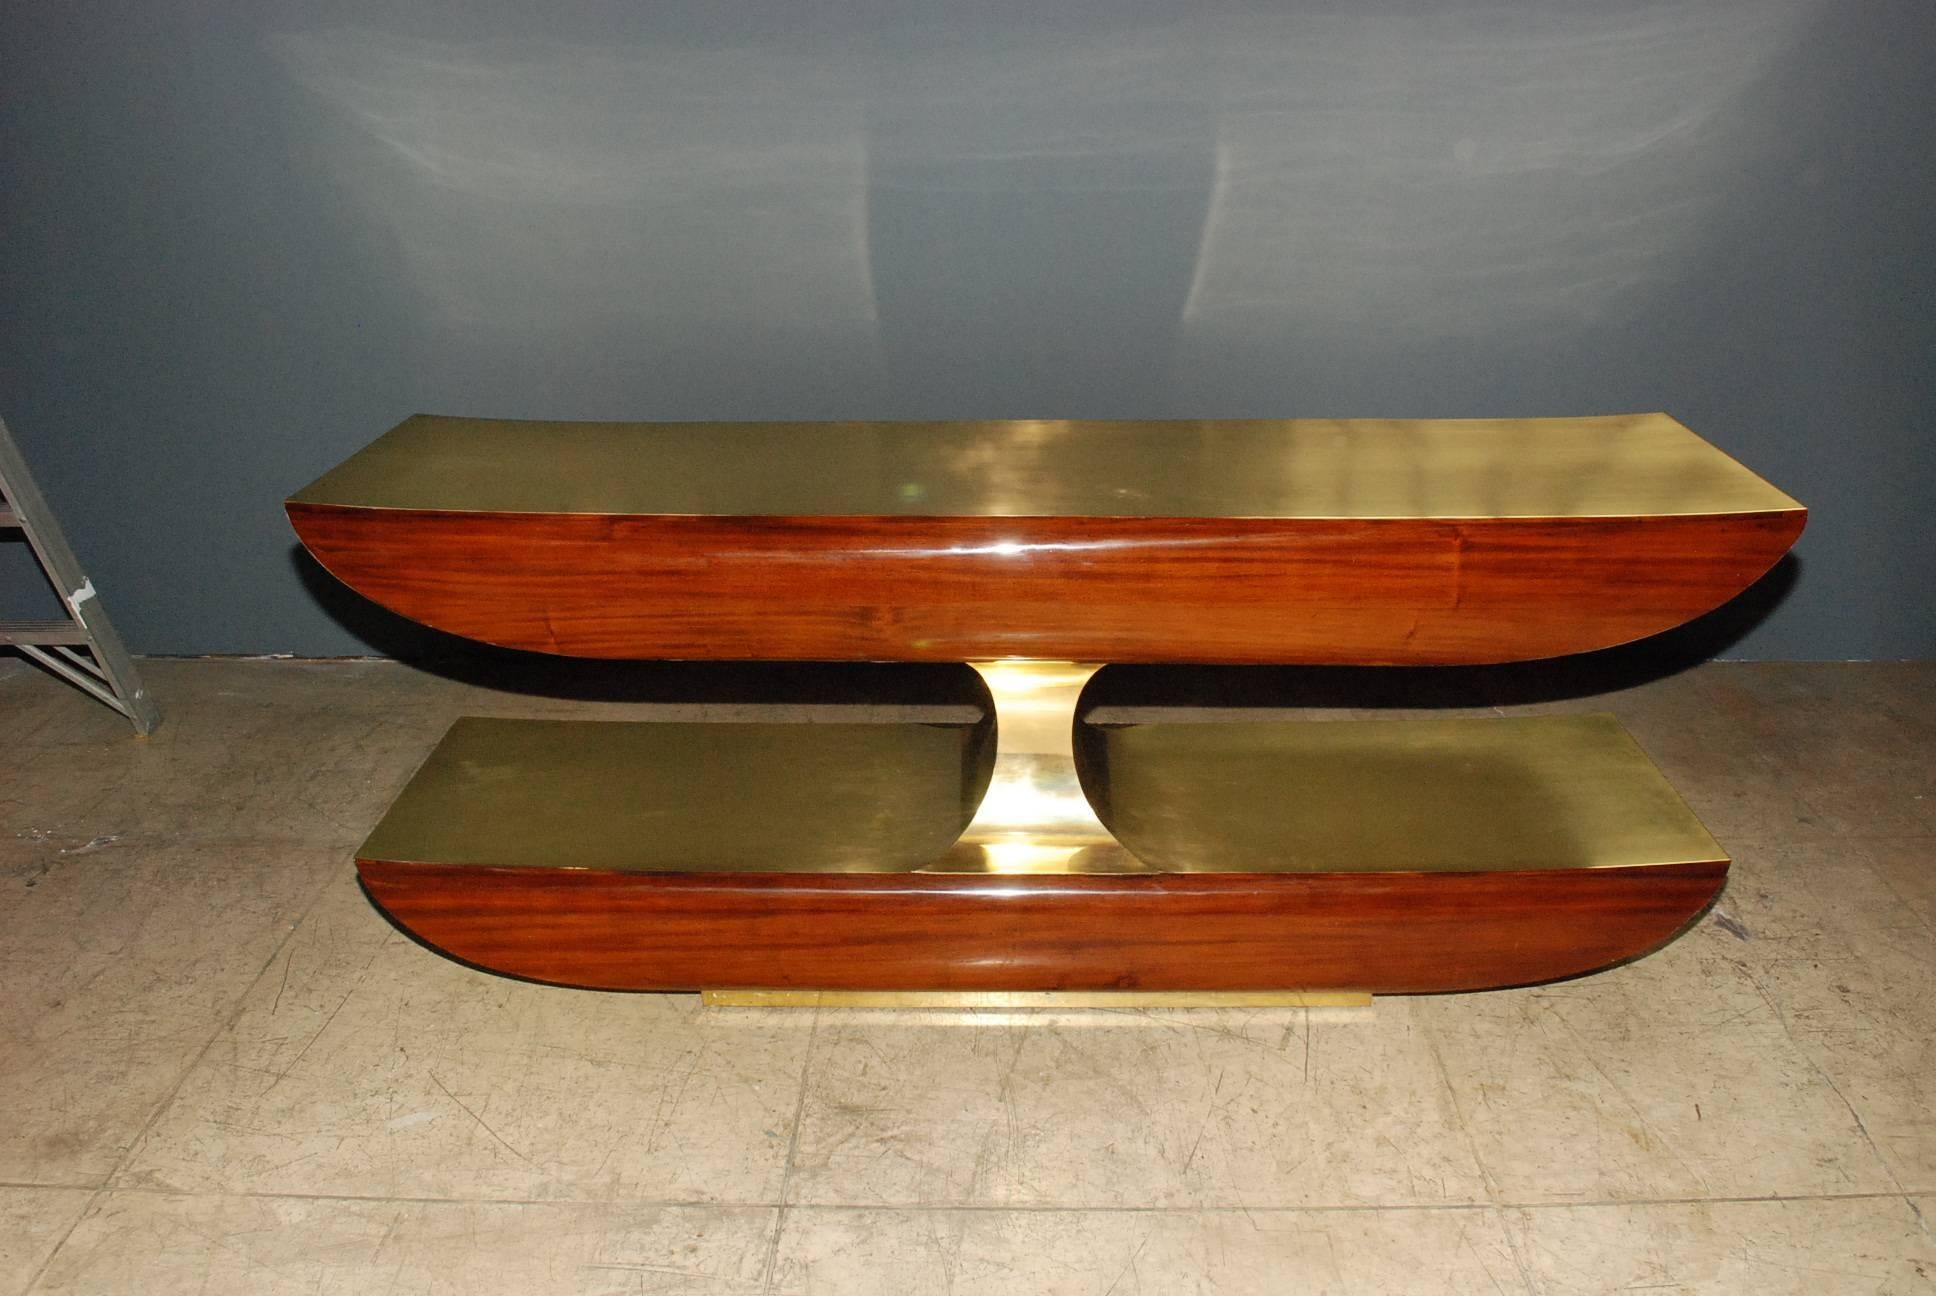 Two tiers bar or console table with solid mahogany front and solid brass the back side also single large drawer. Finish is high gloss brass crystal coat.